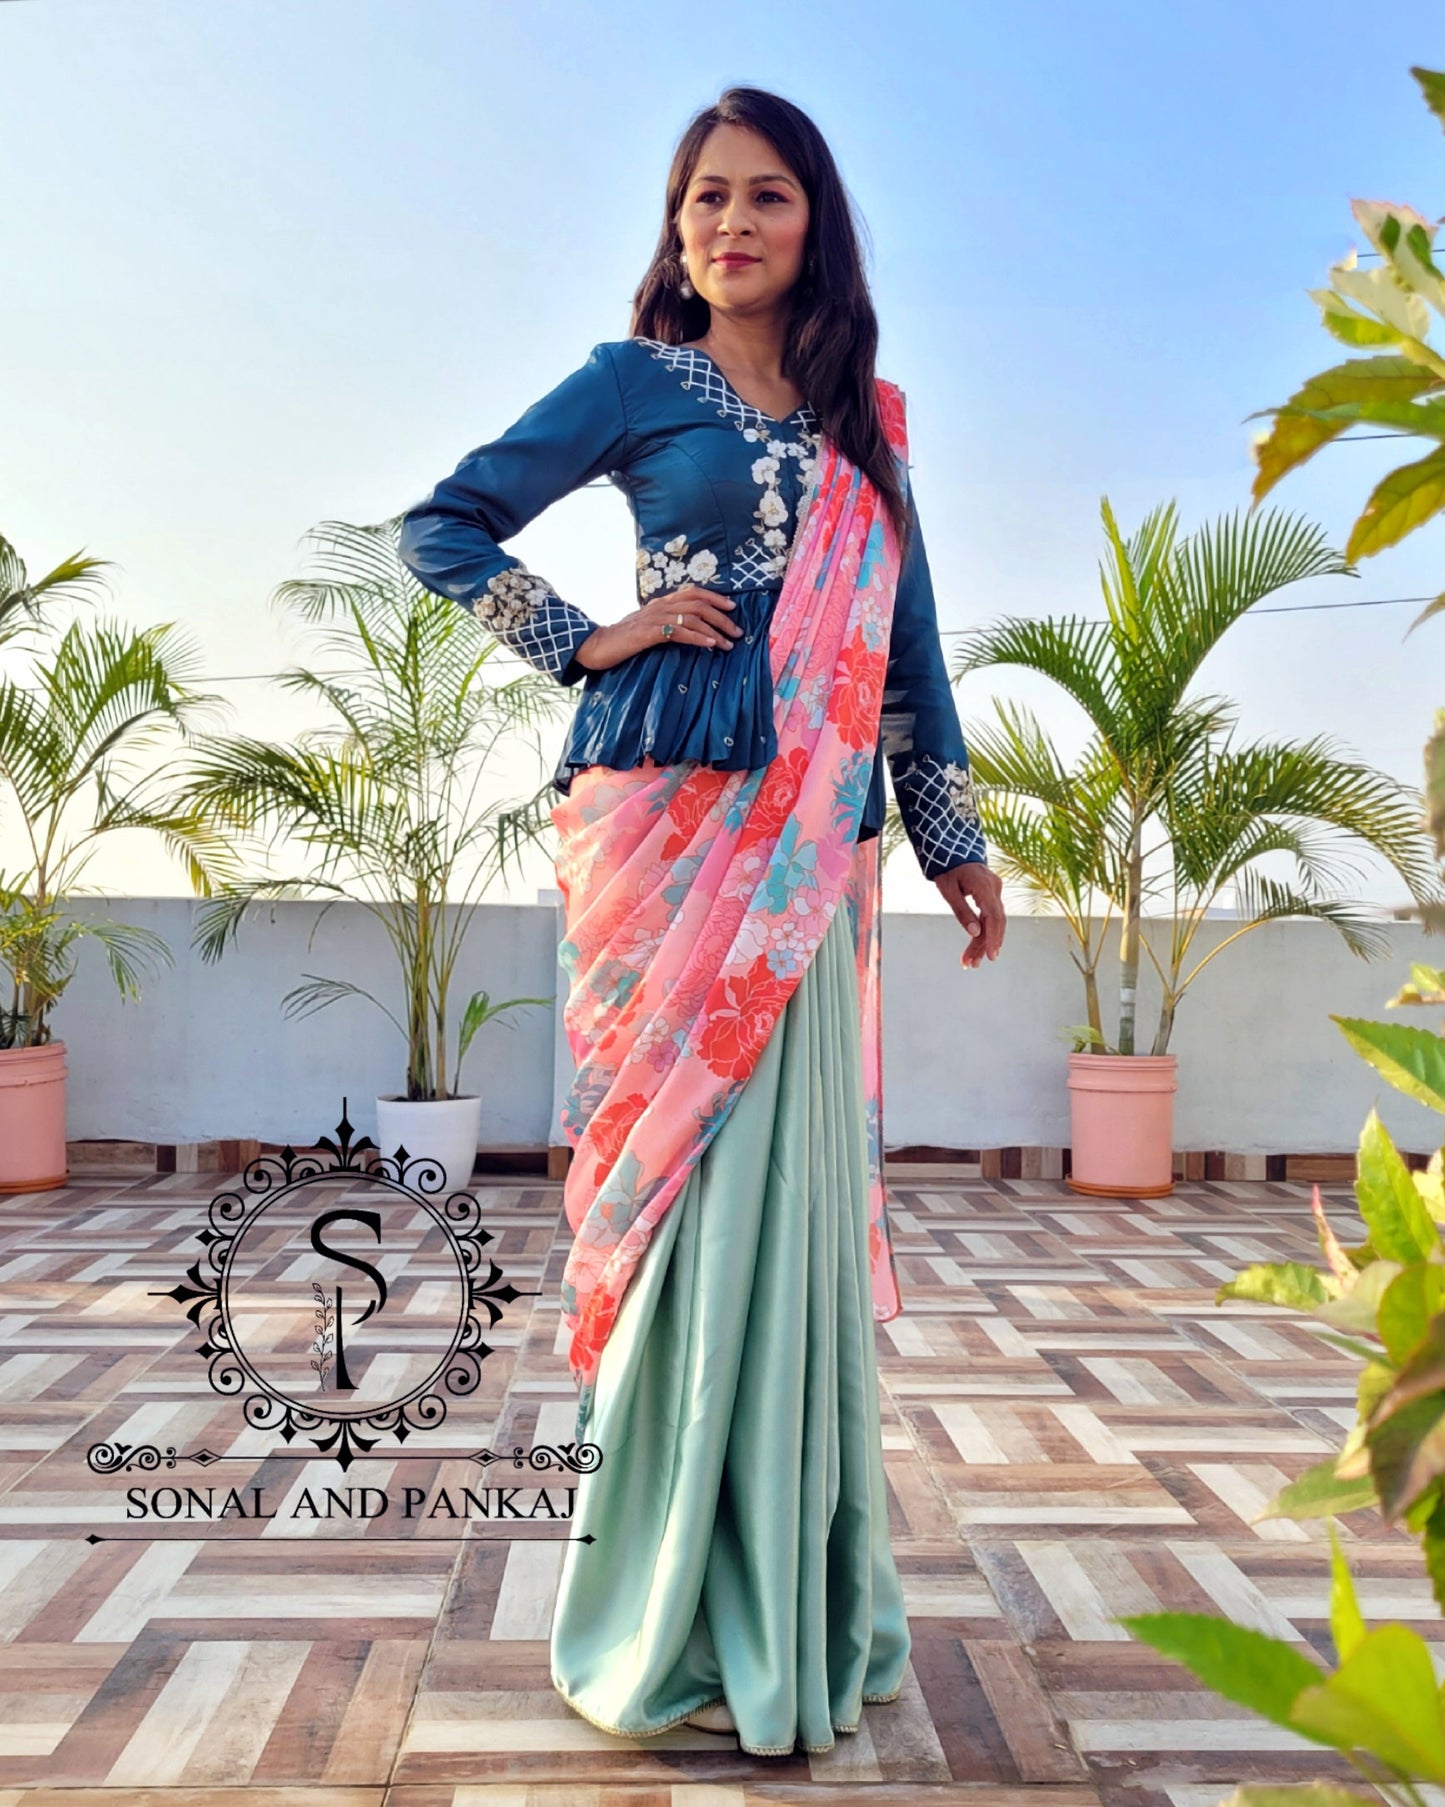 Teal Green Hand Embroidered Peplum Blouse With Beautiful Saree - SAMPLE01226